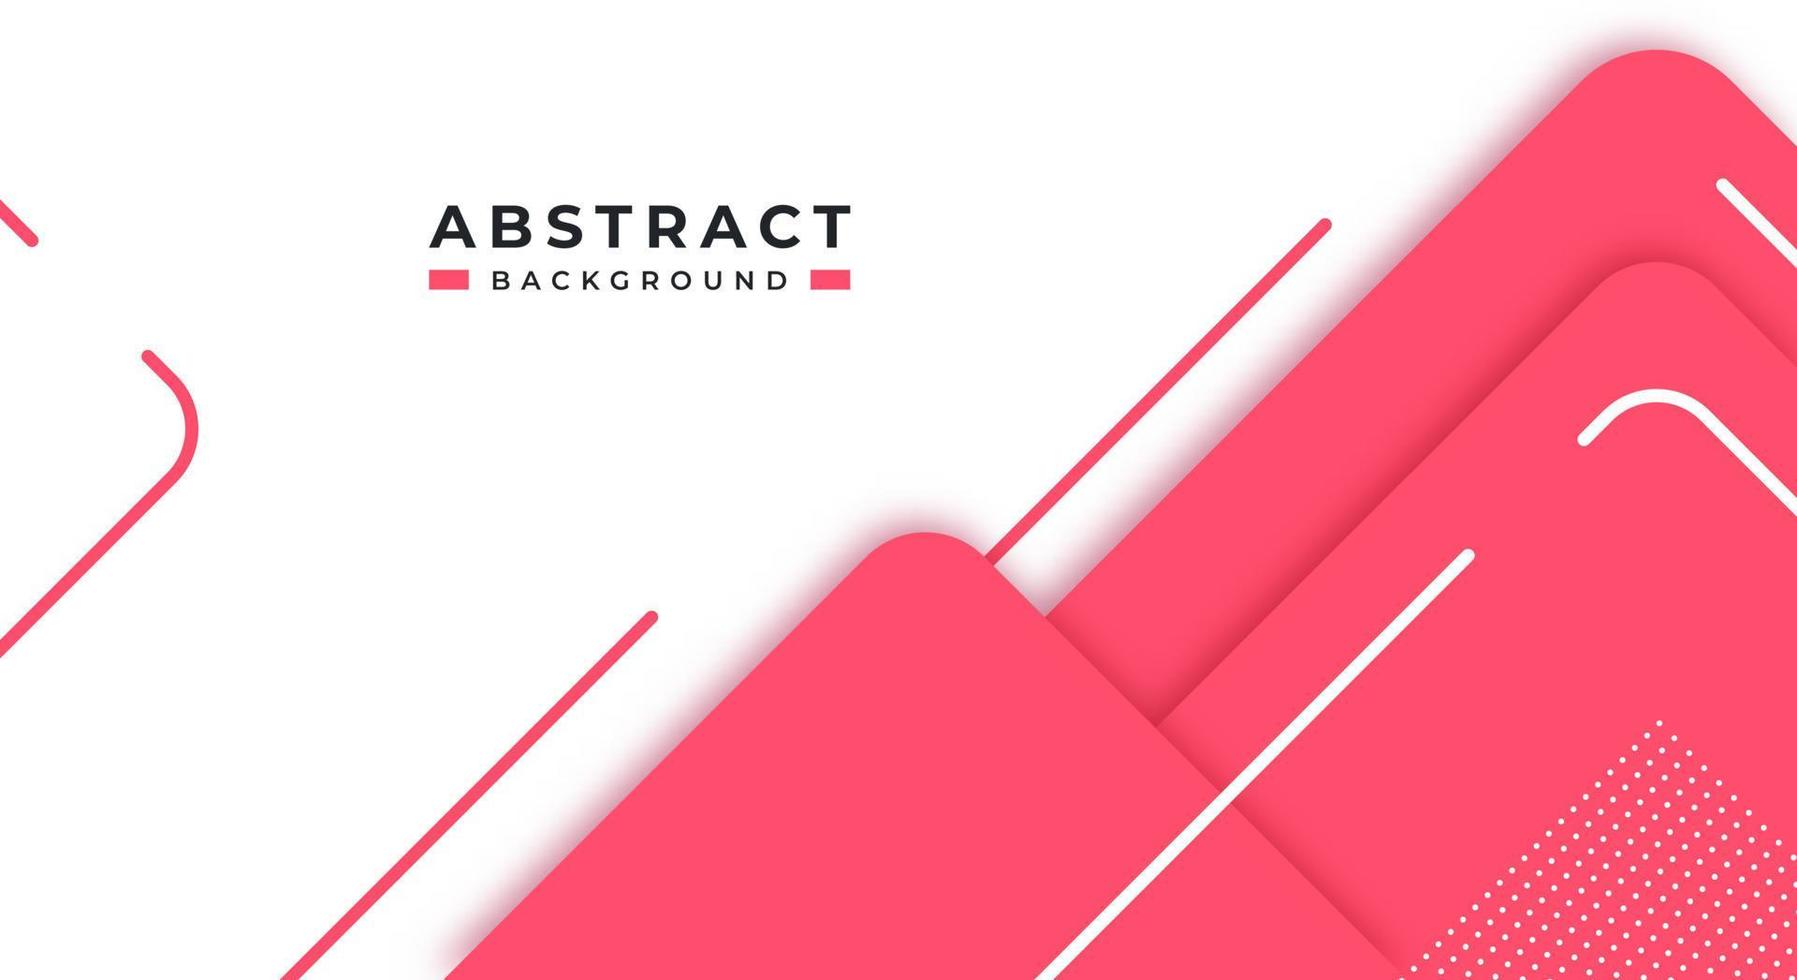 Abstract Pink Background Geometric Shape Paper Layers with Copy Space for Decorative web layout, Poster, Banner, Corporate Brochure and Seminar Template Design vector